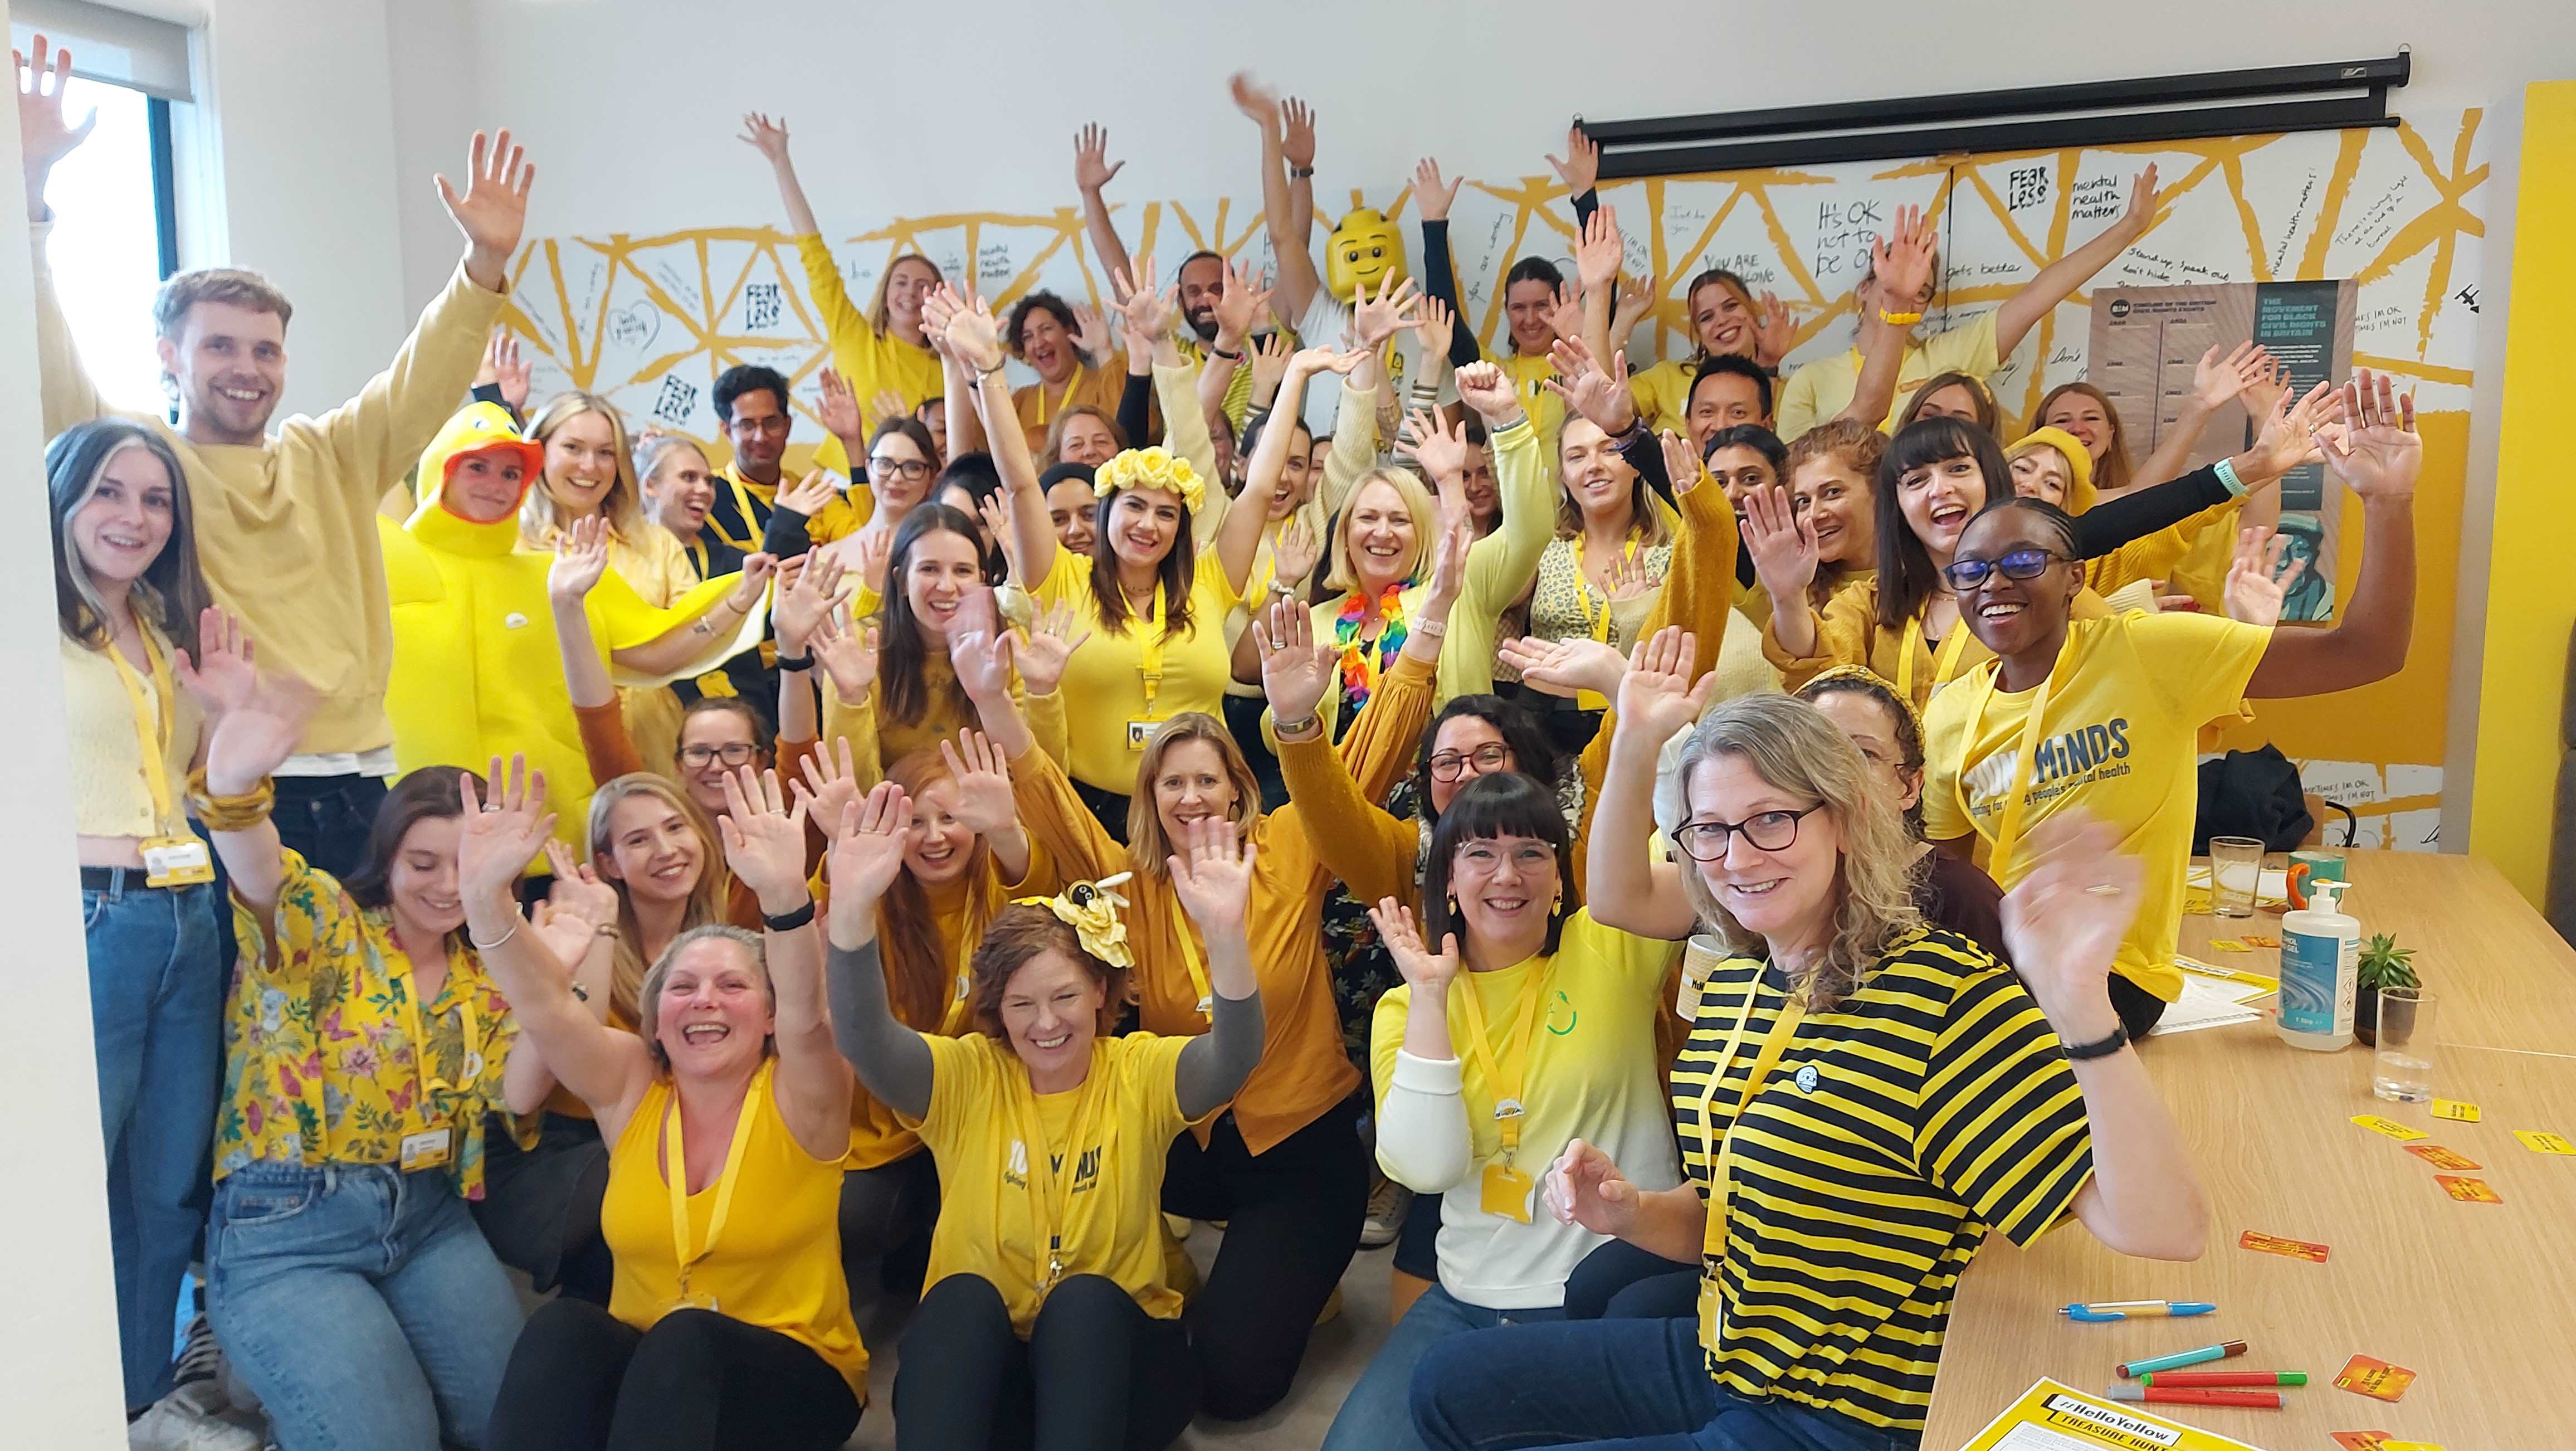 All the staff at YoungMinds wearing yellow and celebrating with their hands in the air on #HelloYellow and World Mental Health Day